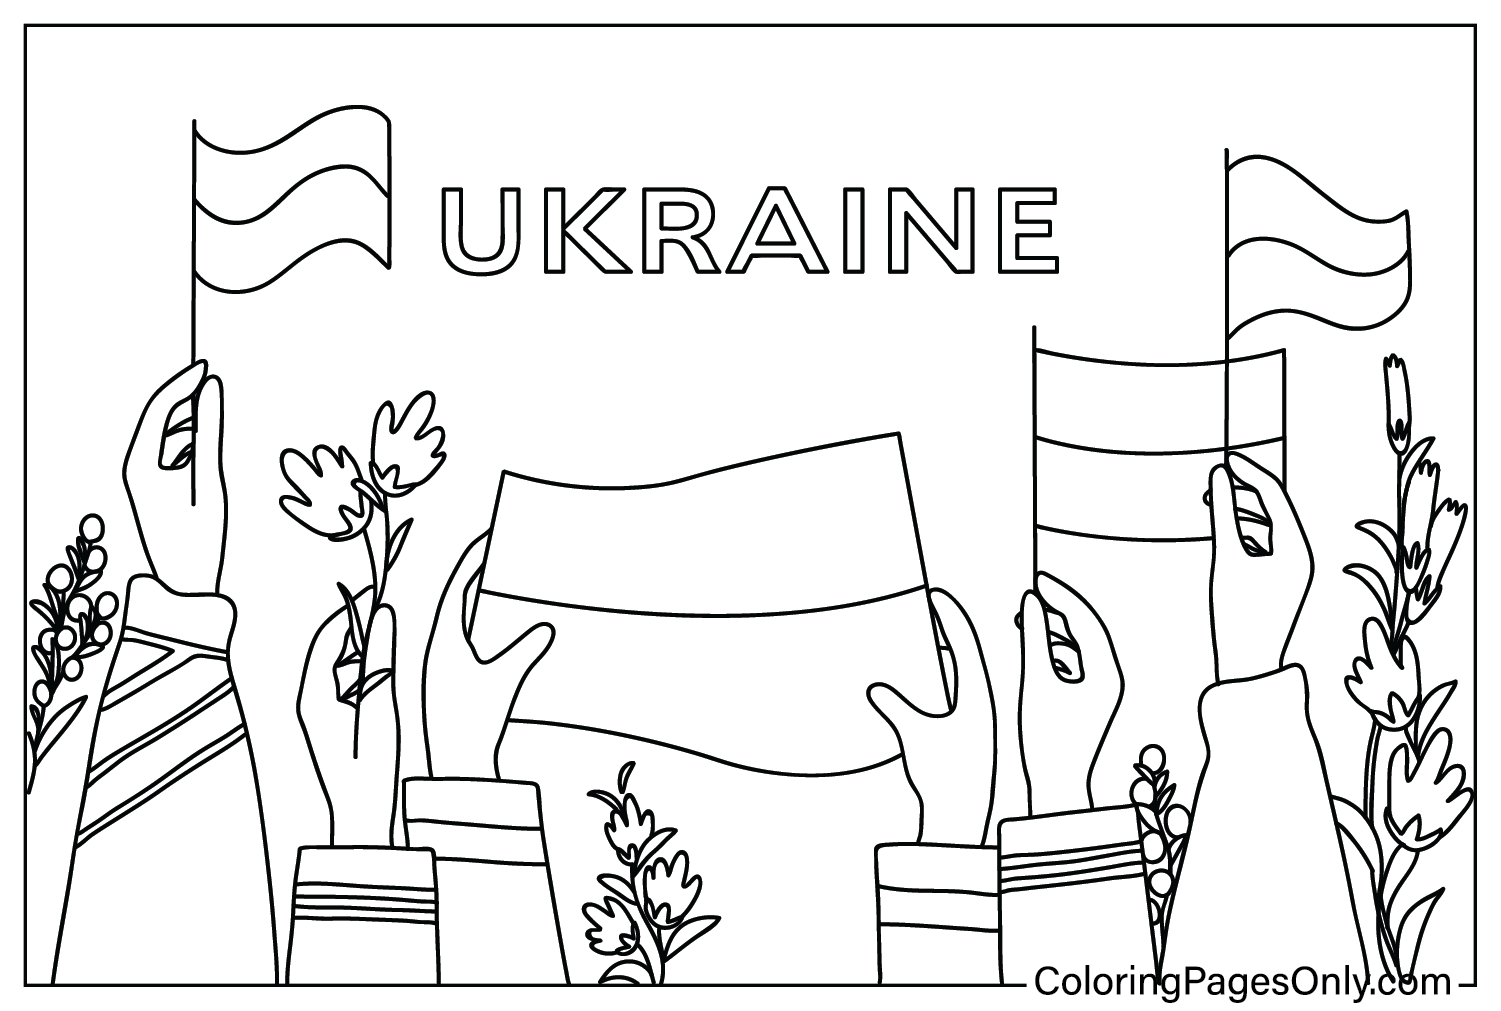 Ukraine Coloring Page Free Printable Free Printable Coloring Pages